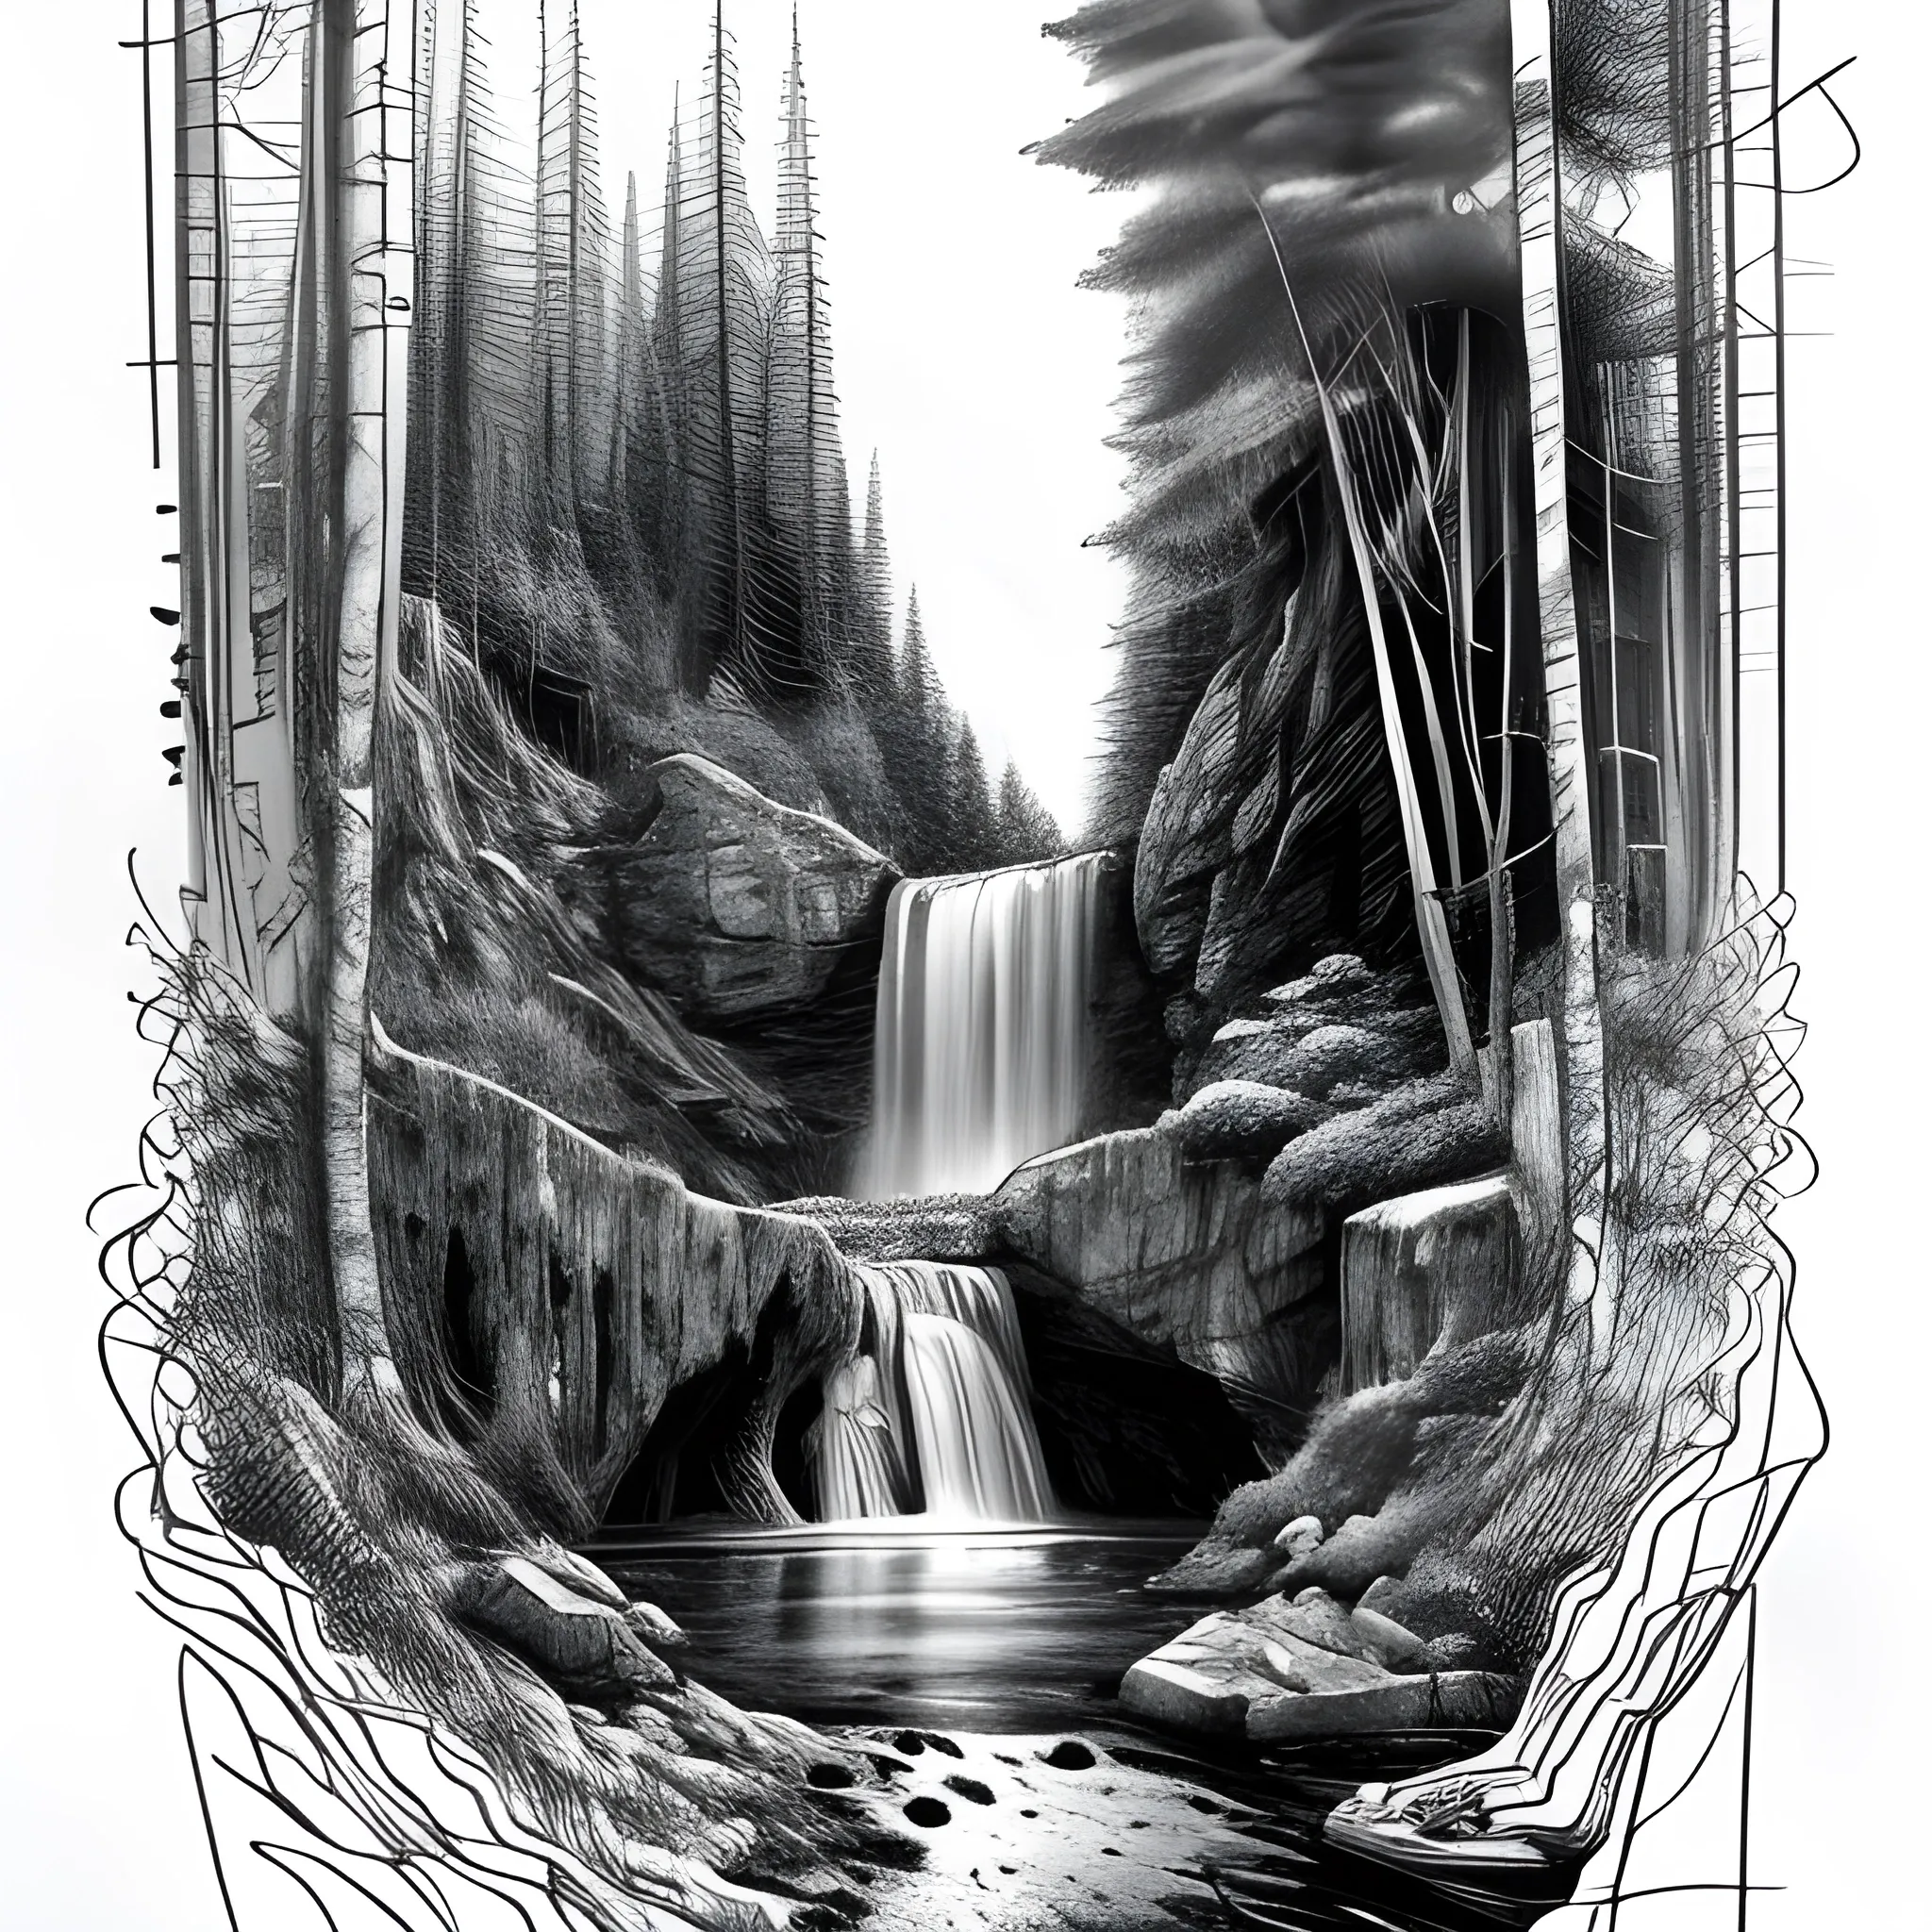 Pencil drawing, nature with waterfall in the background